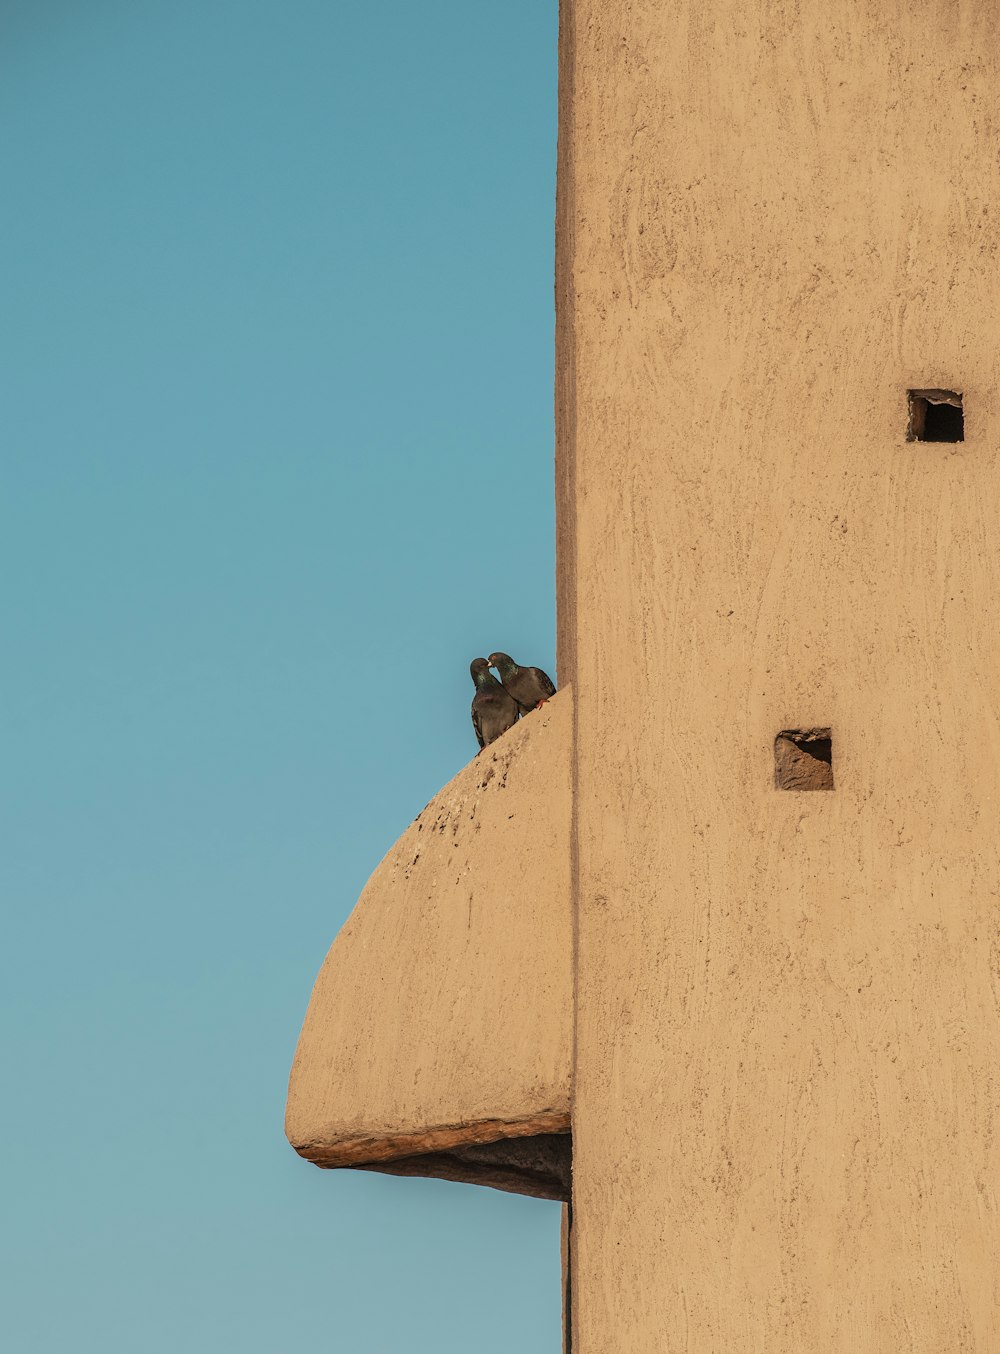 a bird perched on the side of a building